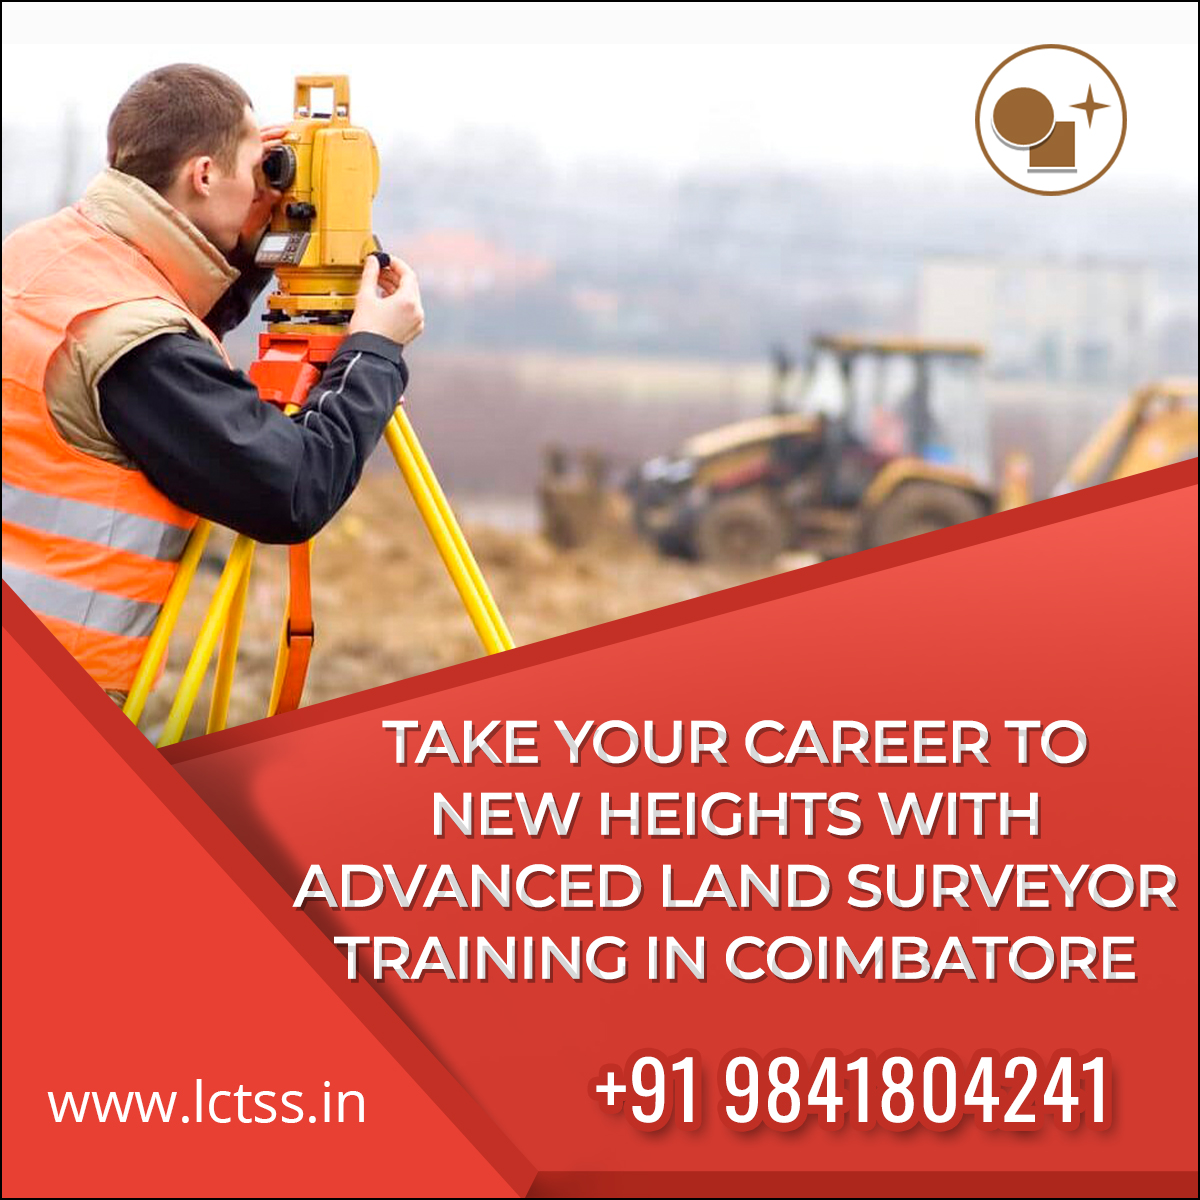 Take Your Career to New Heights with Advanced Land Surveyor Training in Coimbatore